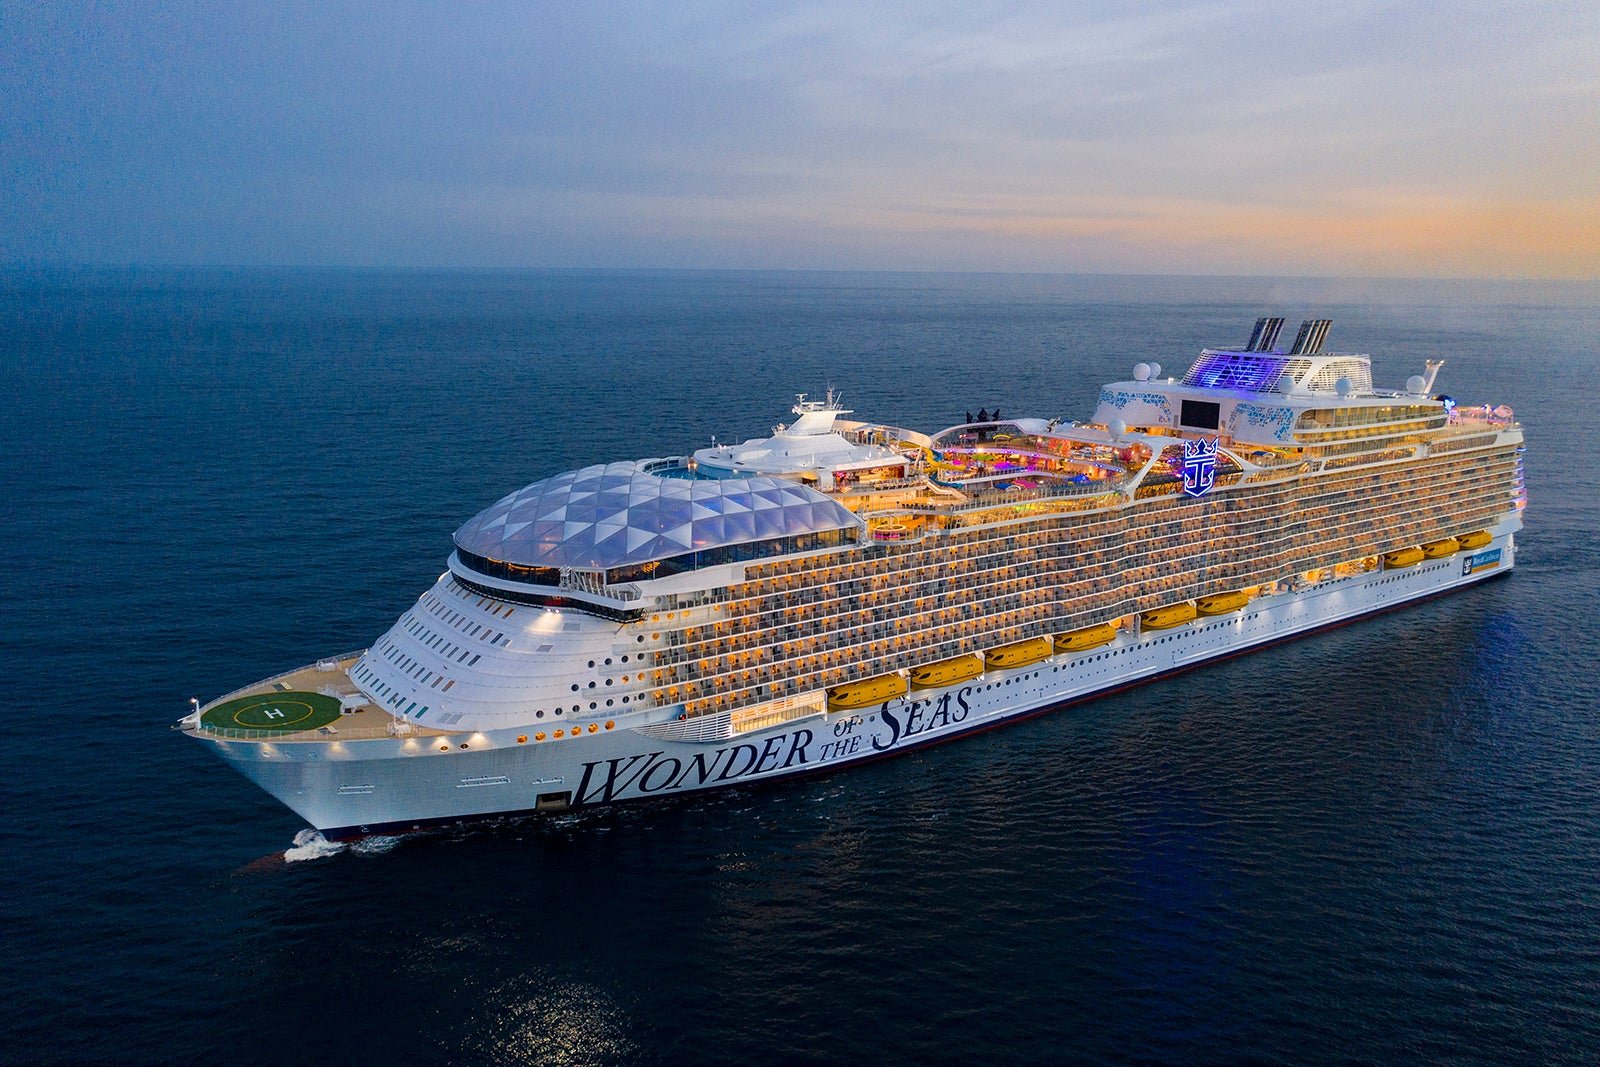 Your Royal Caribbean loyalty status is about to get a lot more valuable